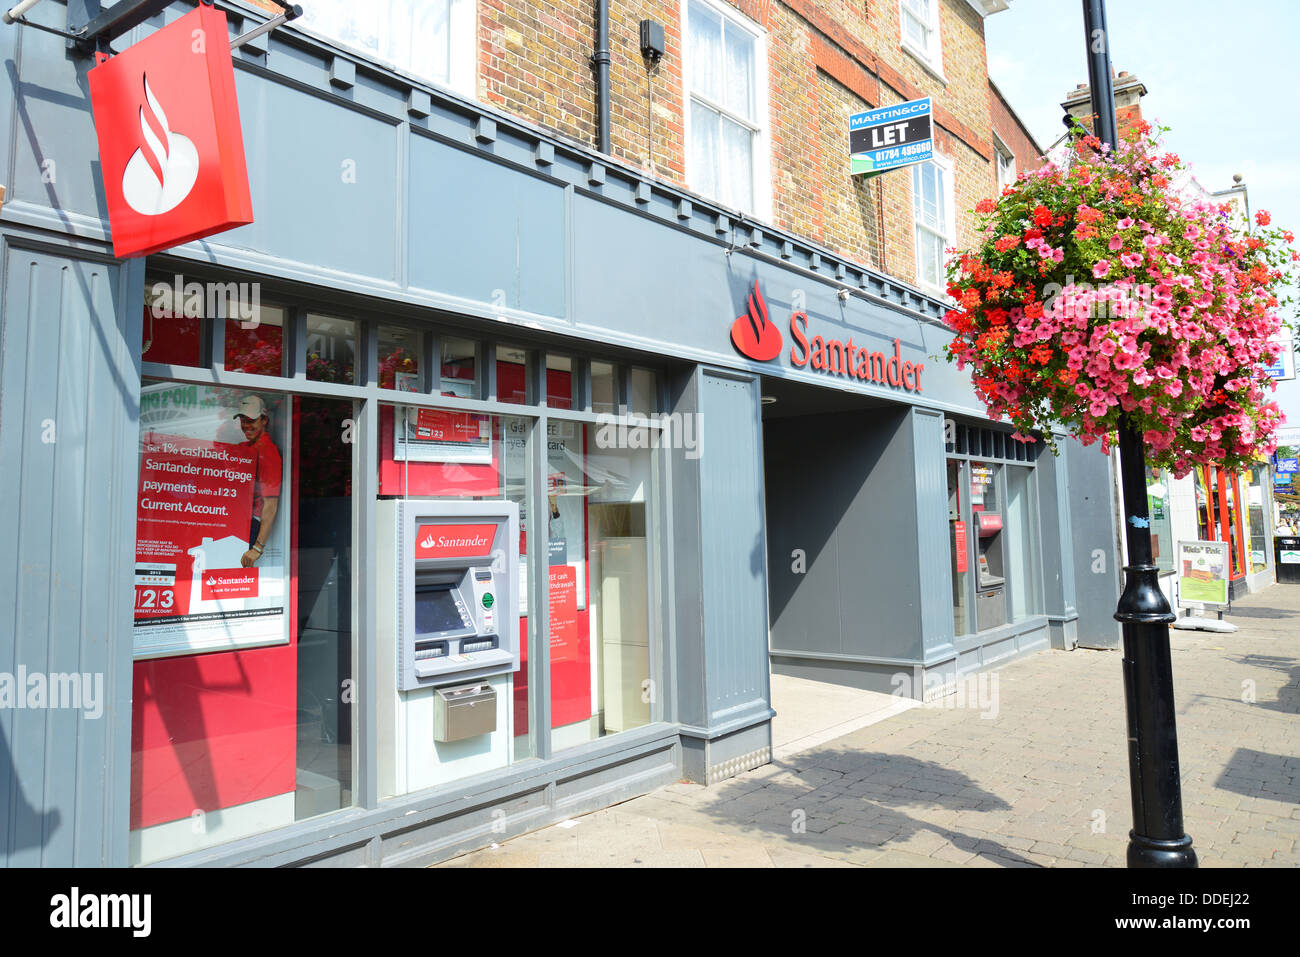 La Banque Santander, High Street, Staines-upon-Thames, Surrey, Angleterre, Royaume-Uni Banque D'Images